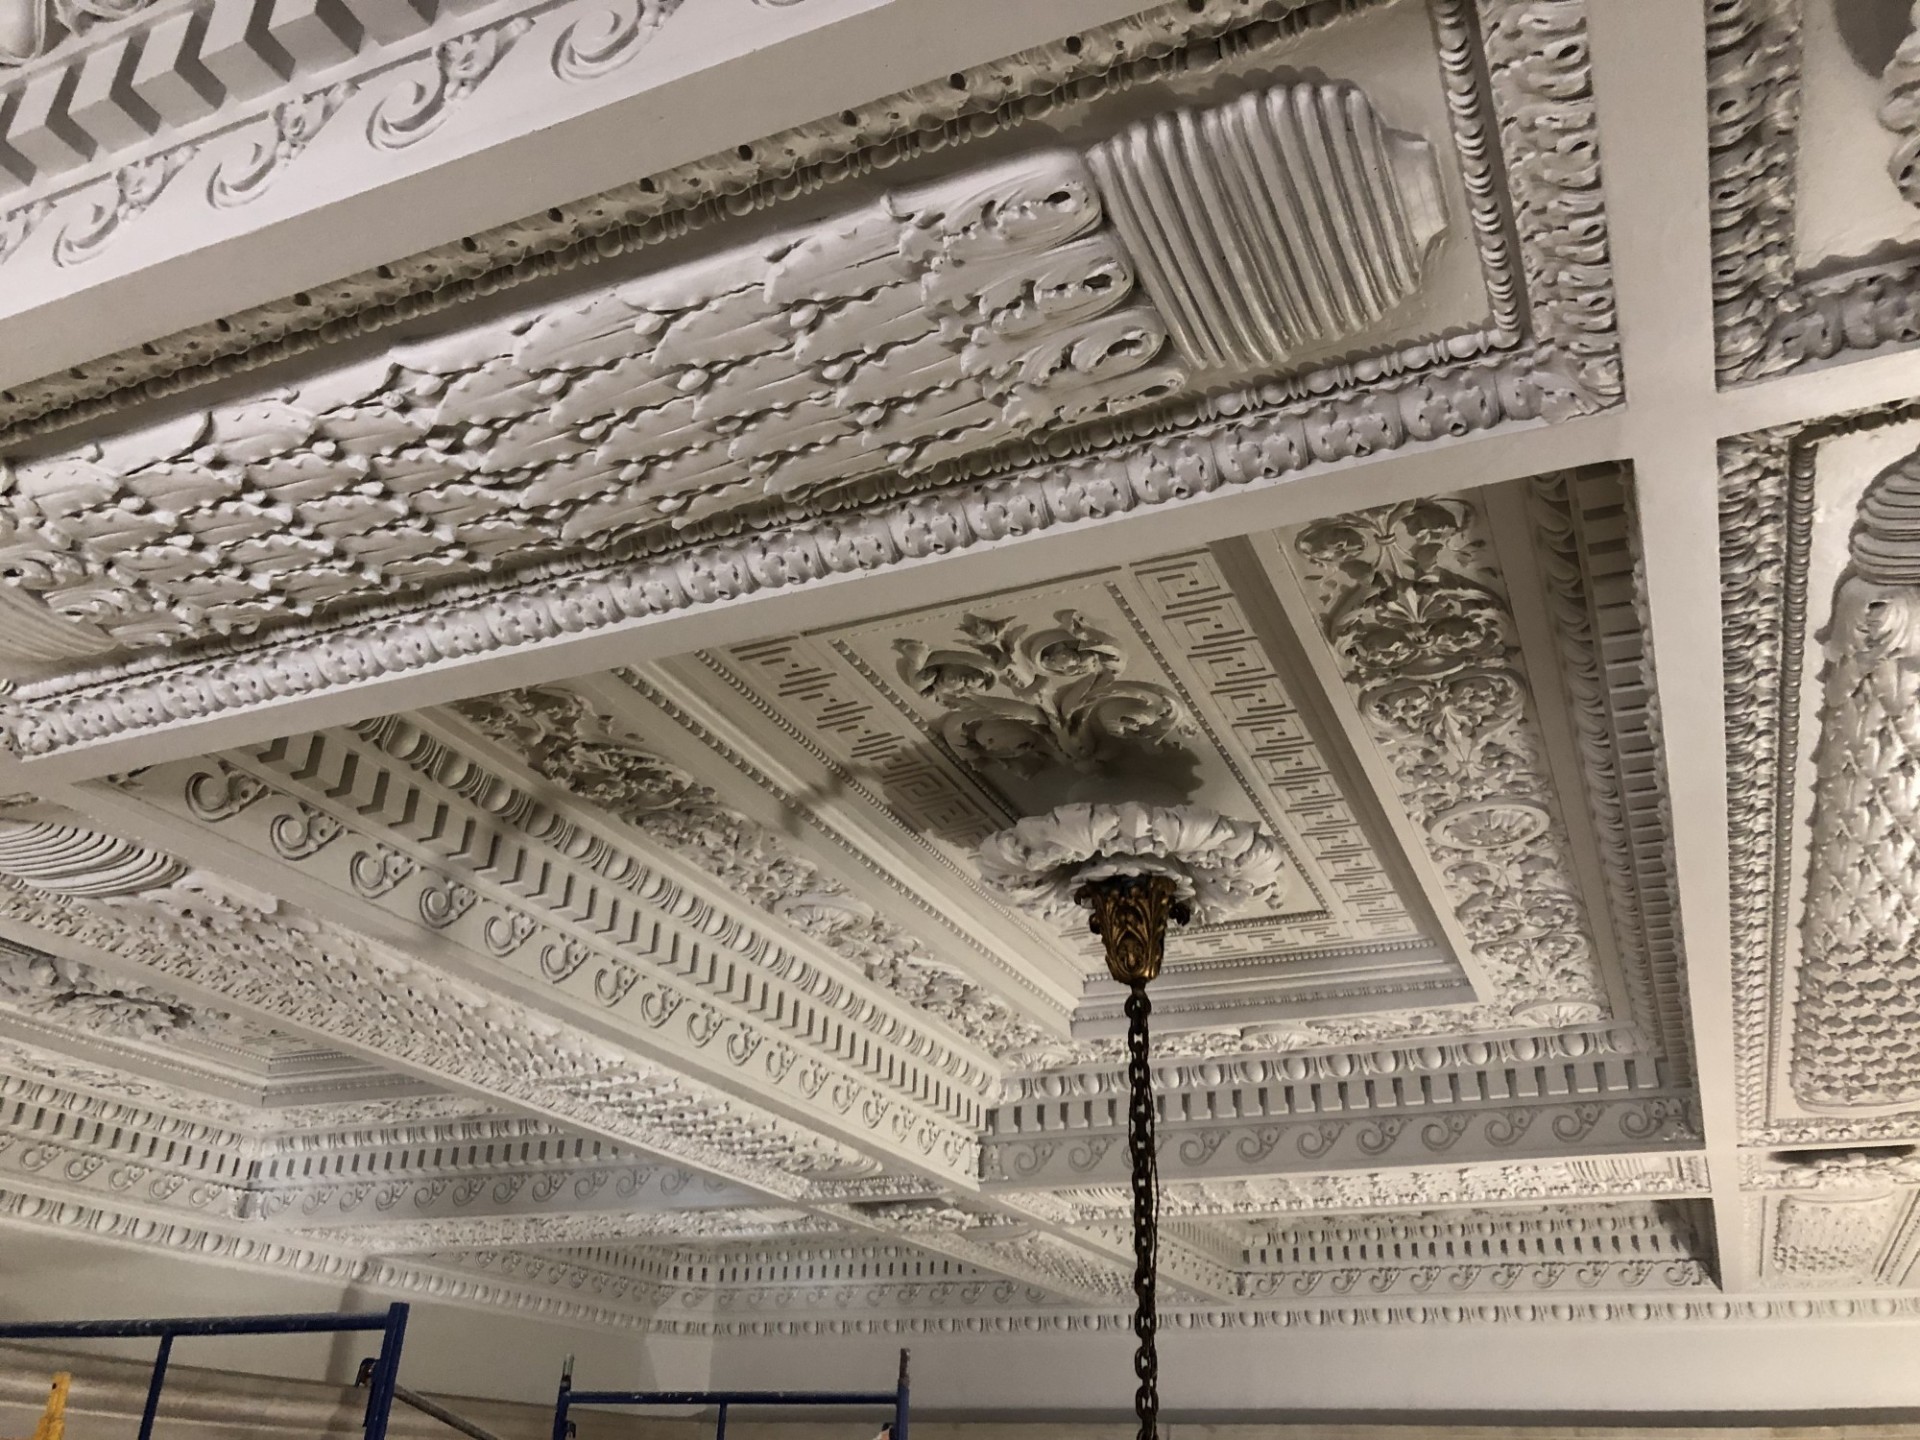 A wide view of the completed repairs and restoration to the ornate plaster ceiling.